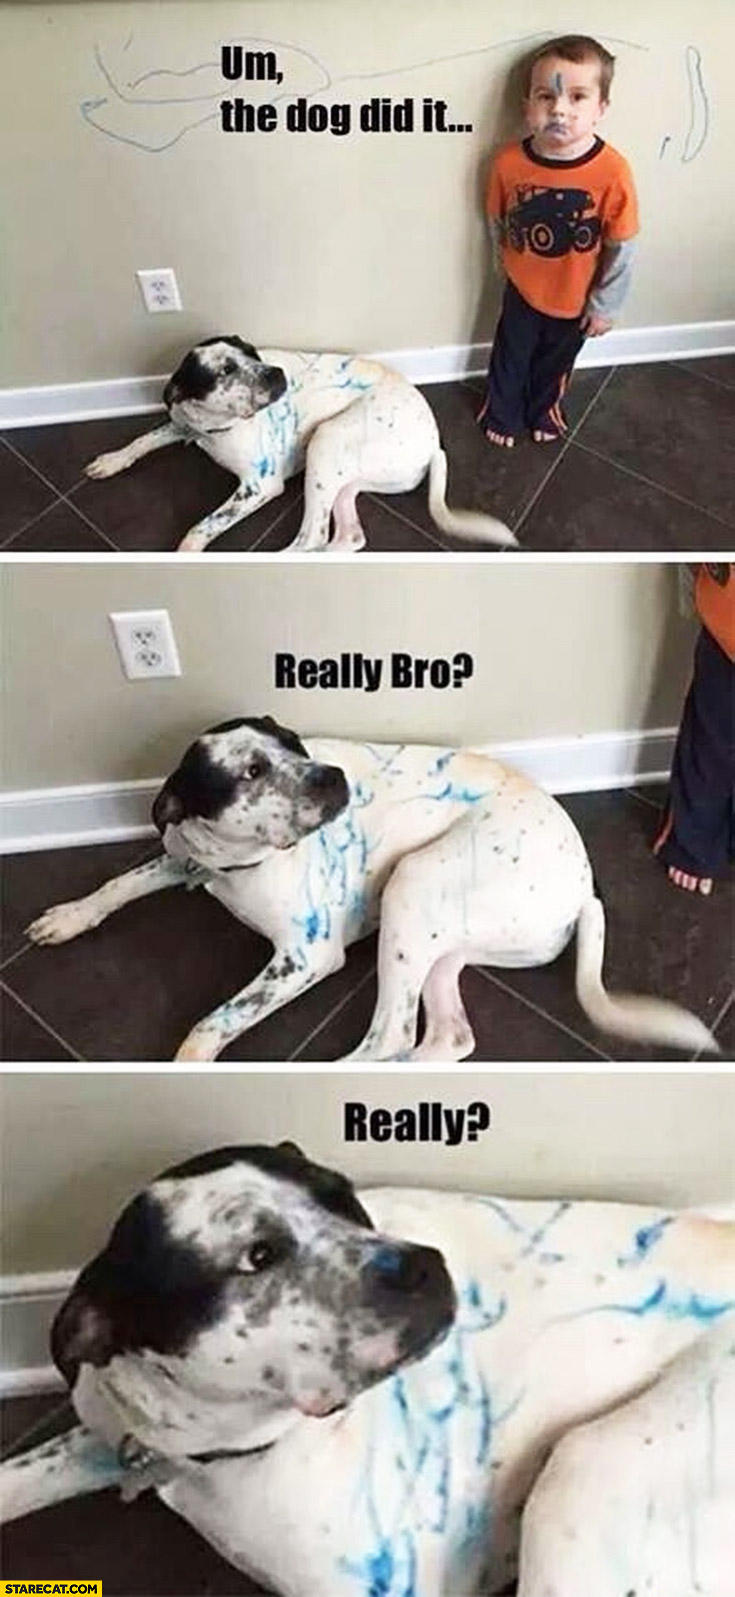 The dog did it really bro really